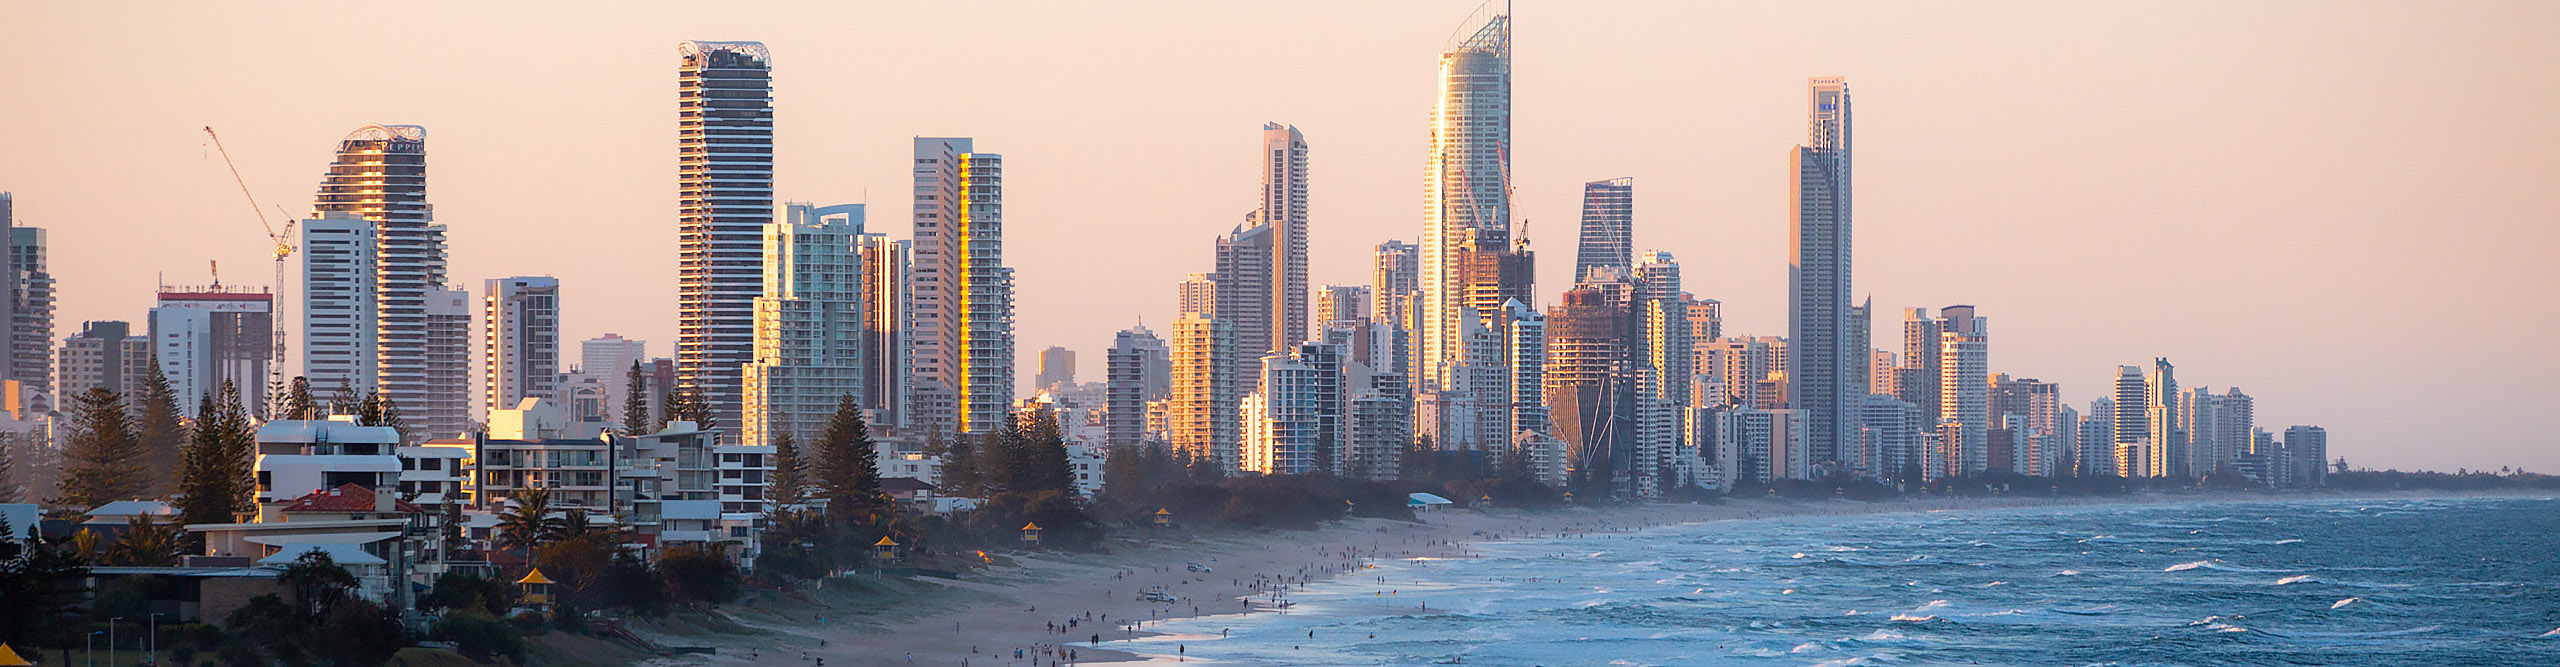 Sunset at Surfers Paradise, with tall buildings in the background, Gold Coast, Queensland, Australia